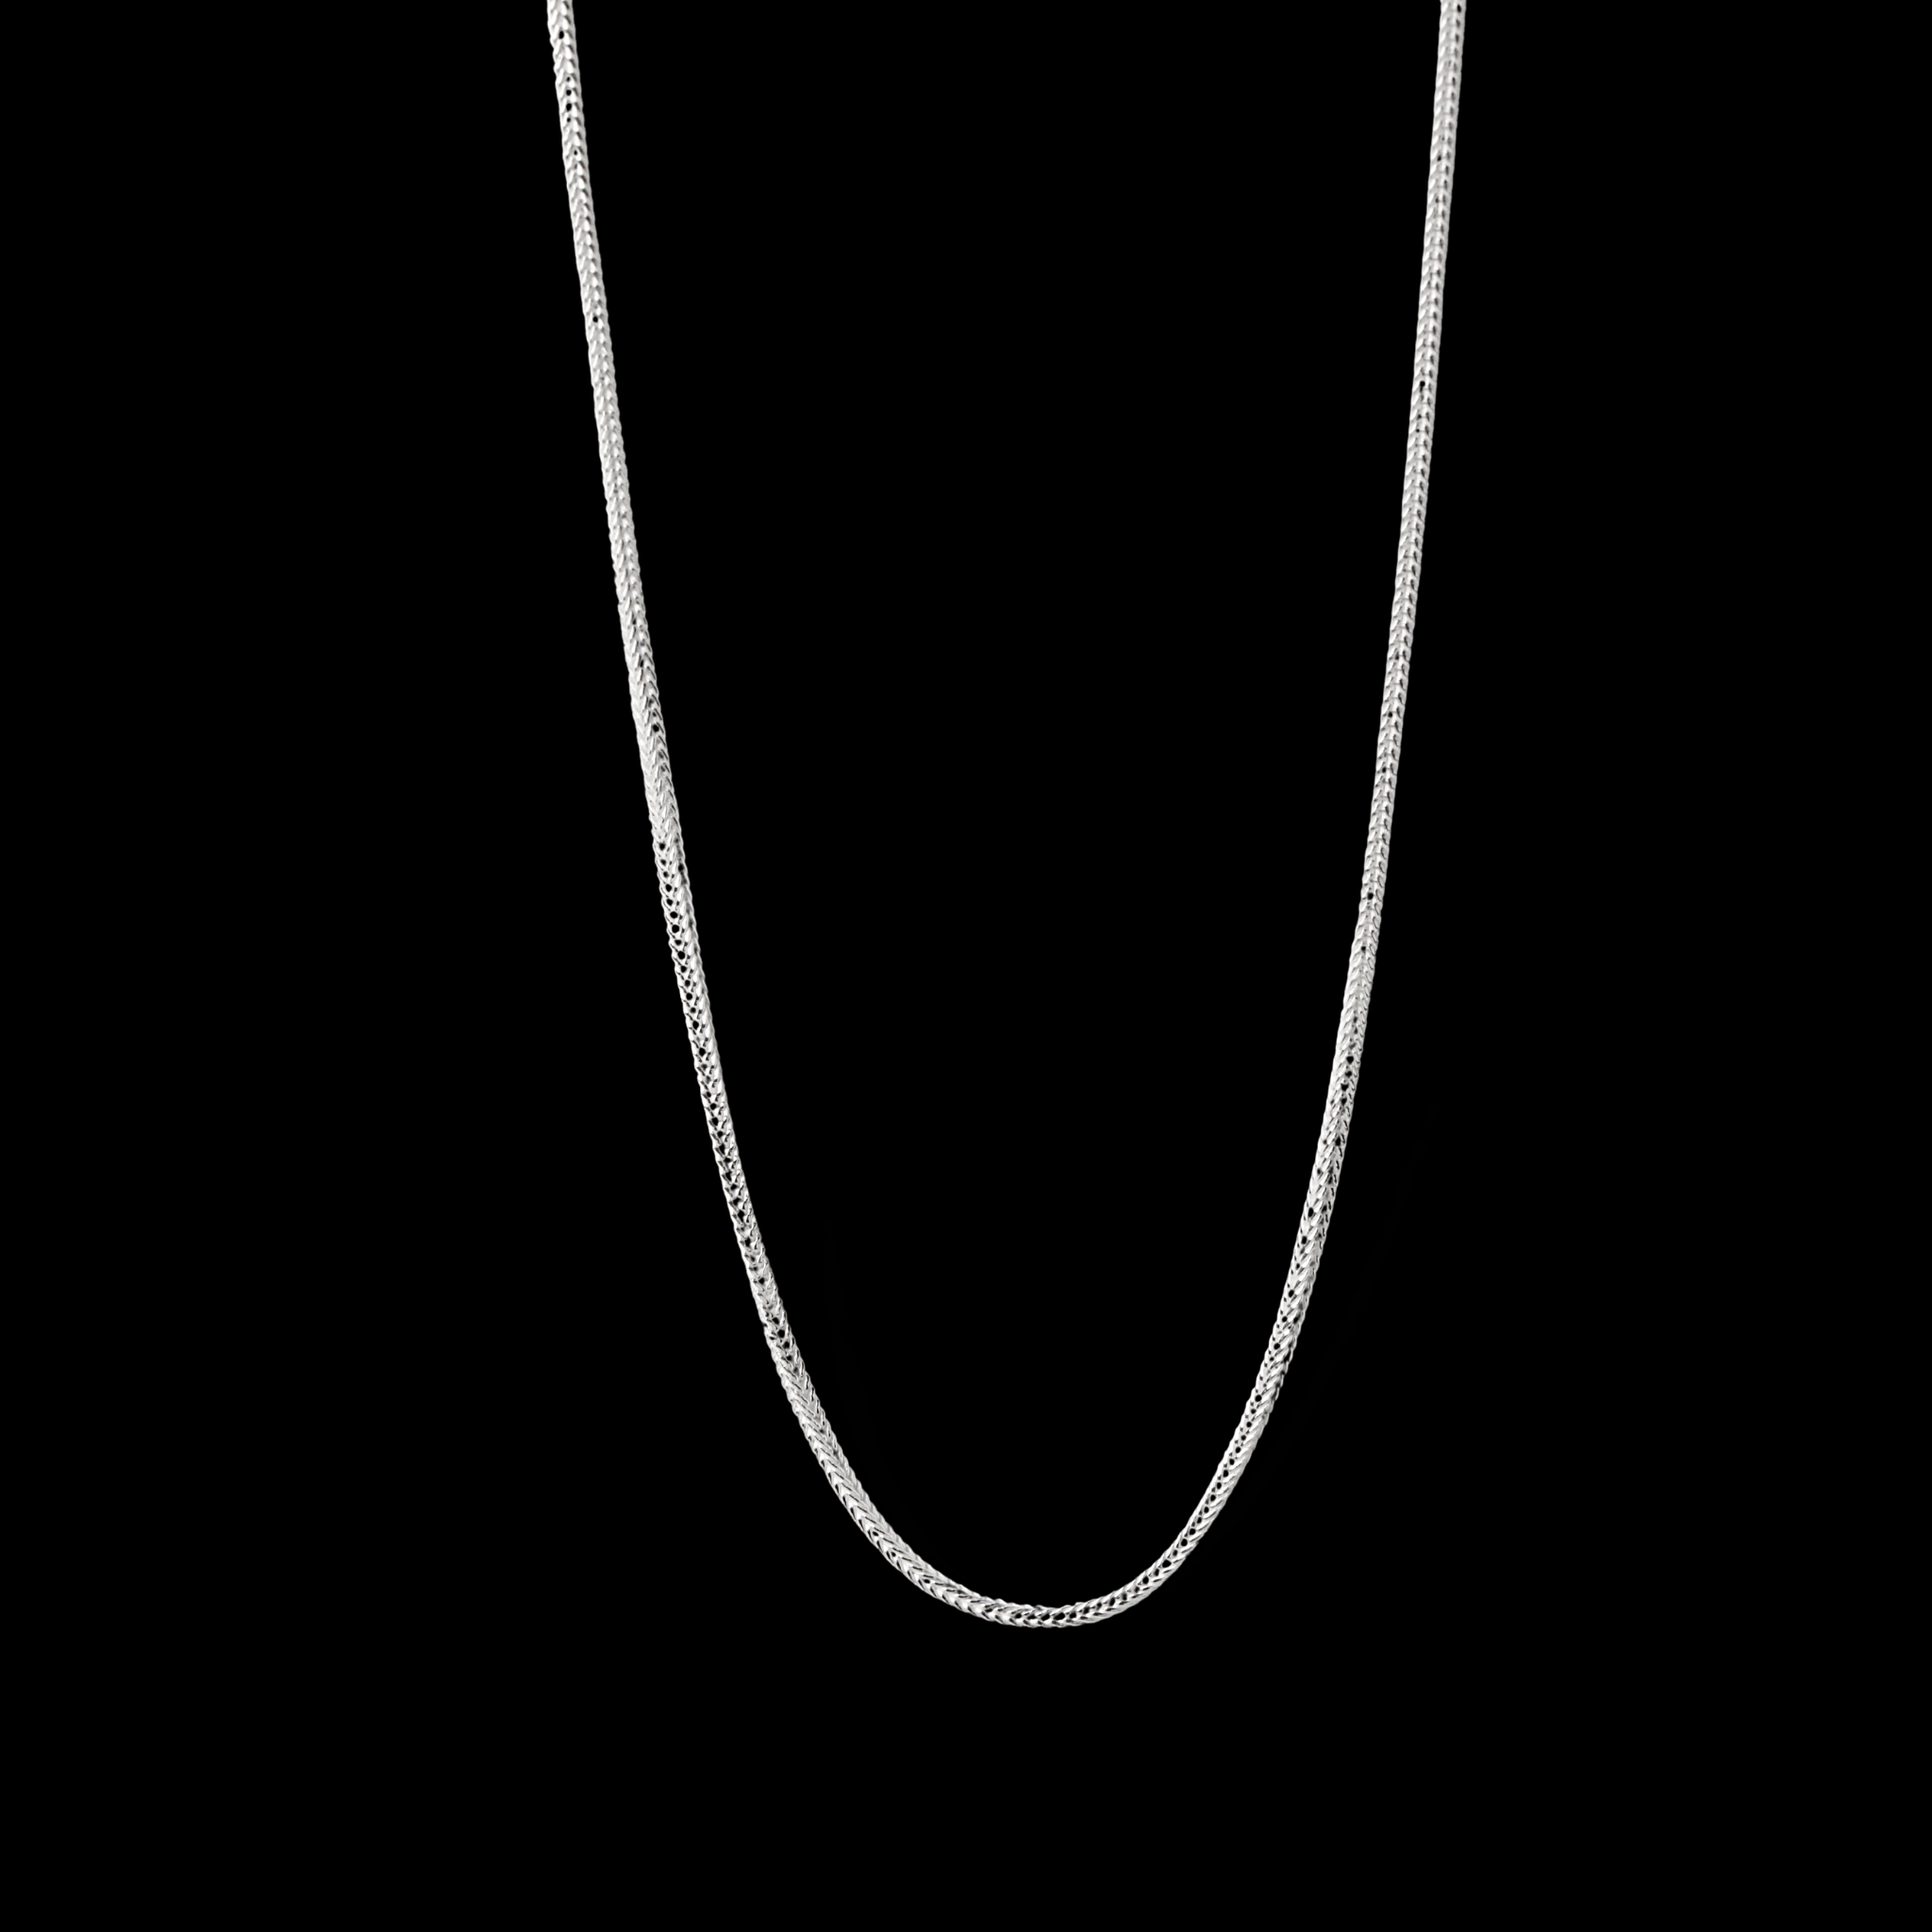 Sterling Silver Bulk / Spooled Round Foxtail Chain in Sterling Silver (1.60 mm - 3.20 mm) Sterling Silver / 3.20 mm